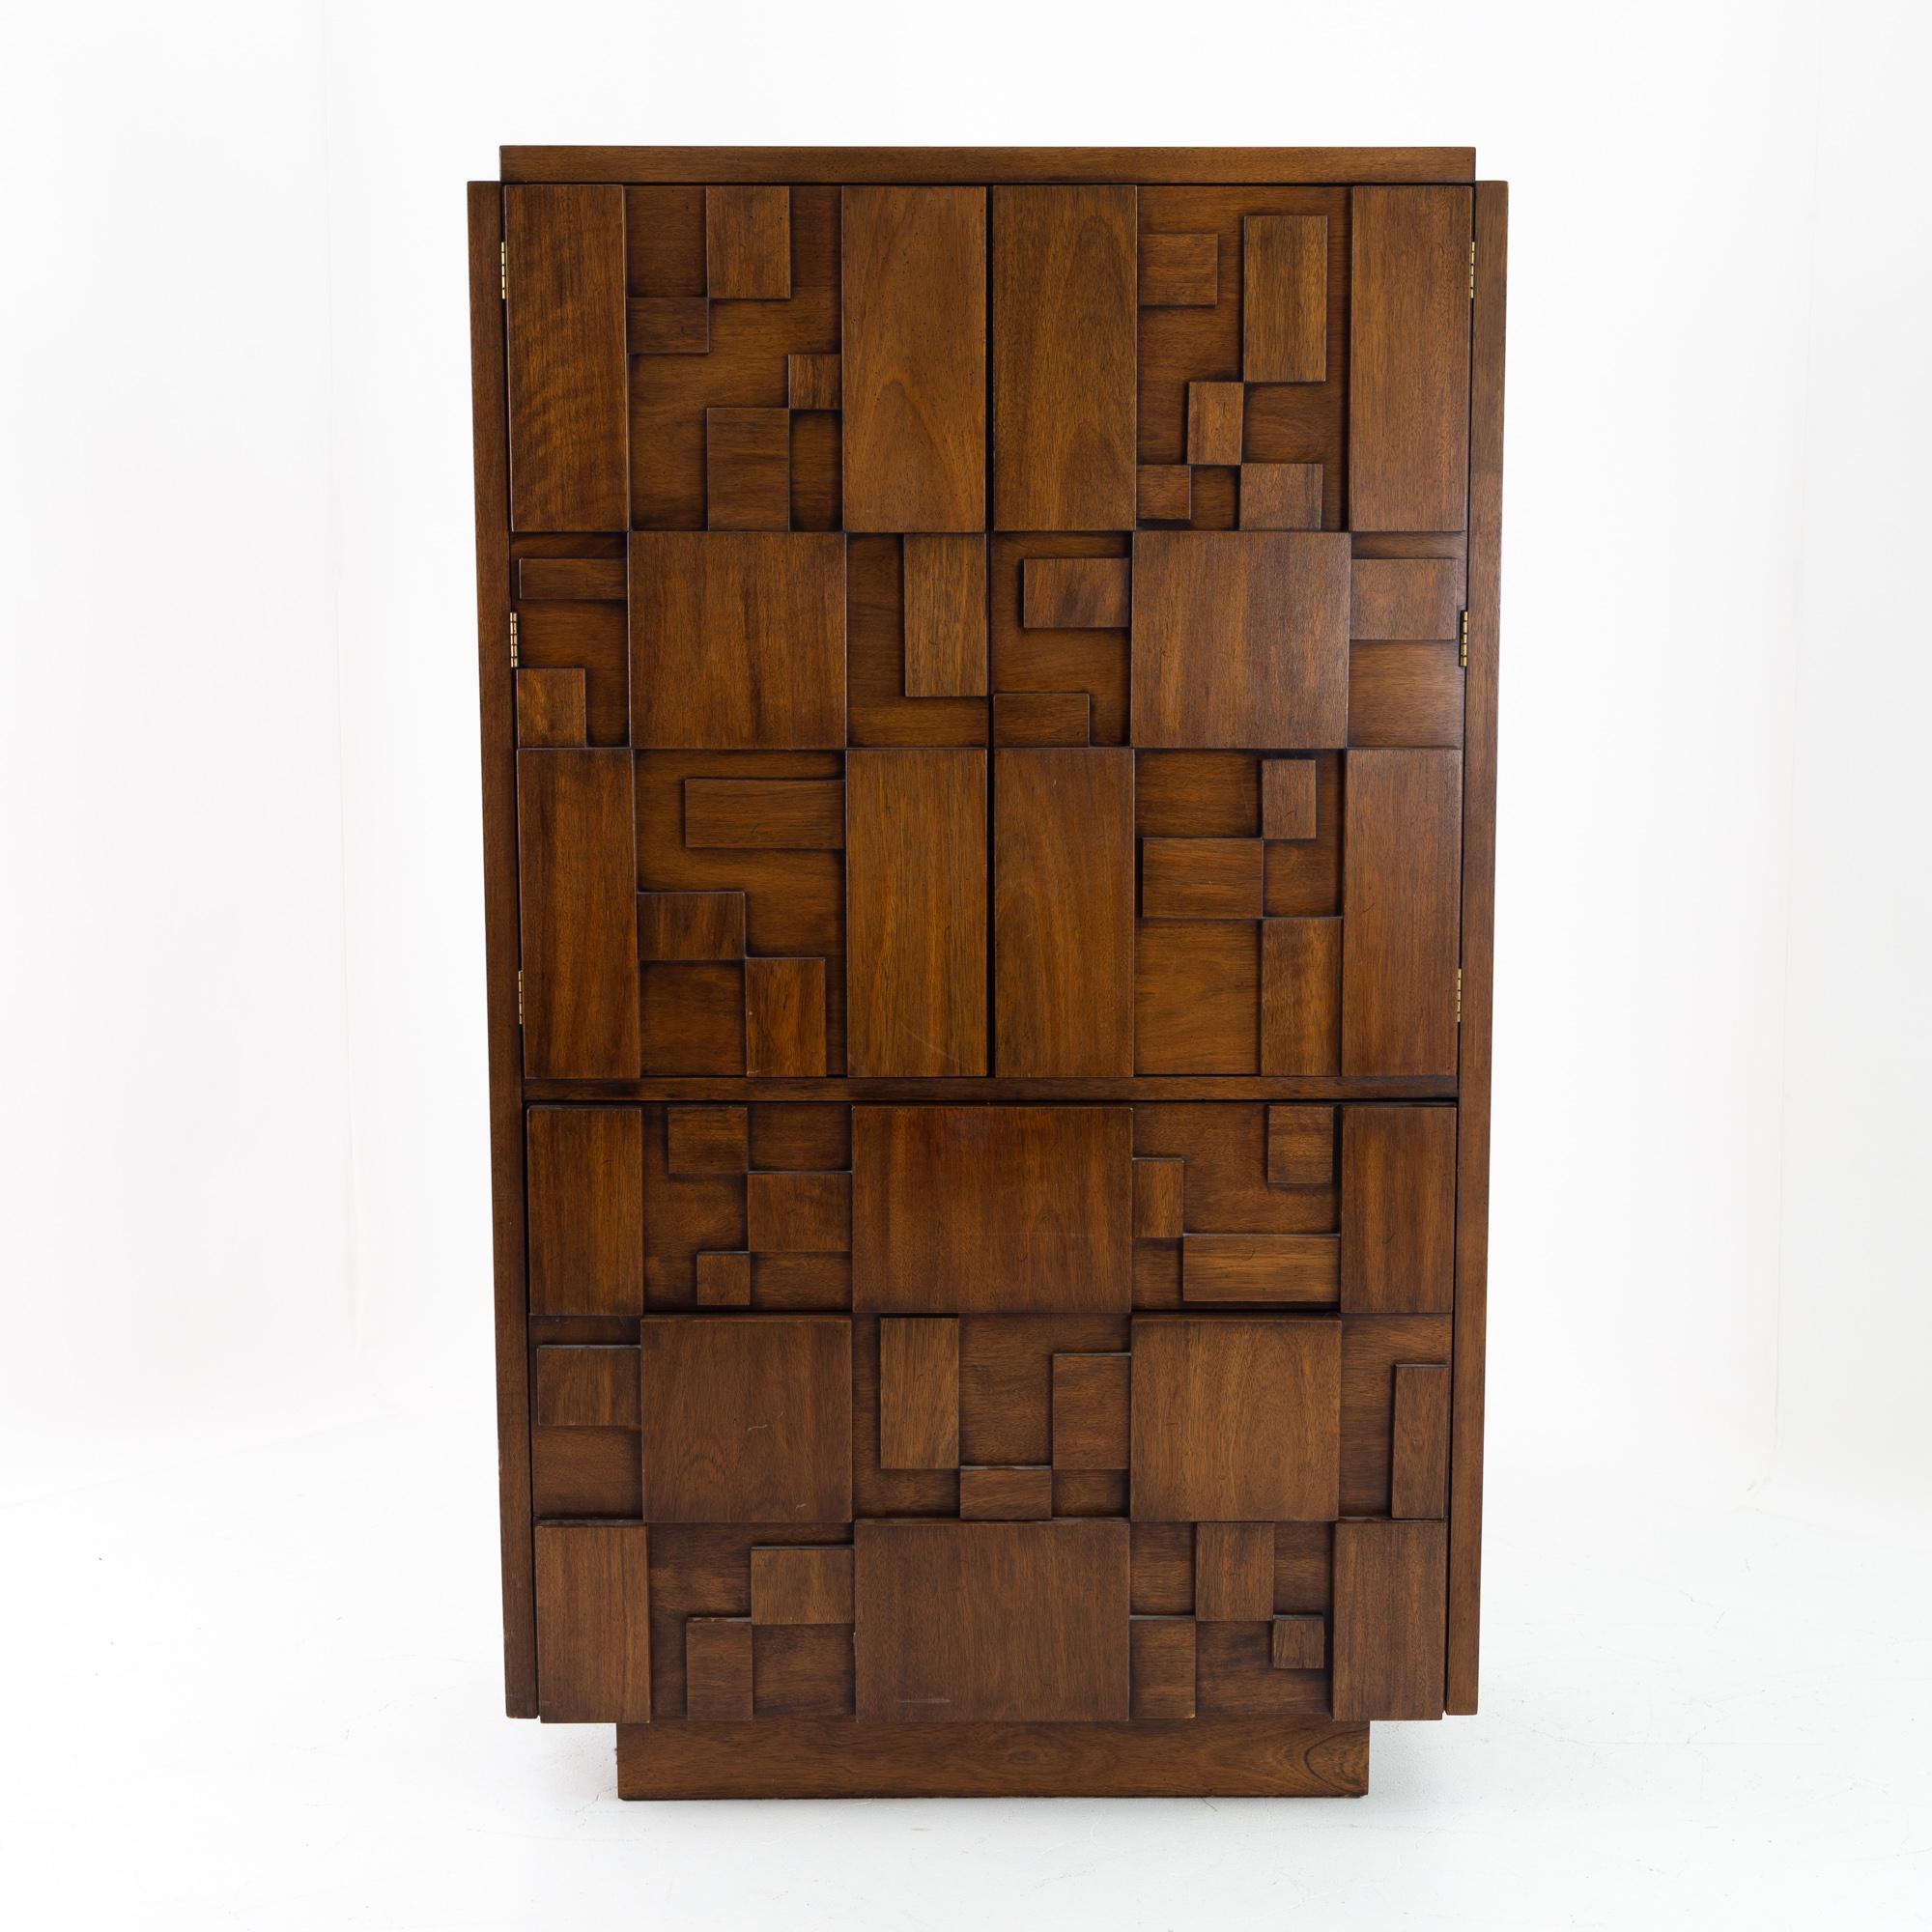 Paul Evans style lane Brutalist mid century 4 drawer highboy gentlemans chest armoire 
Armoire measures: 38 wide x 18.5 deep x 64 inches high

?All pieces of furniture can be had in what we call restored vintage condition. That means the piece is